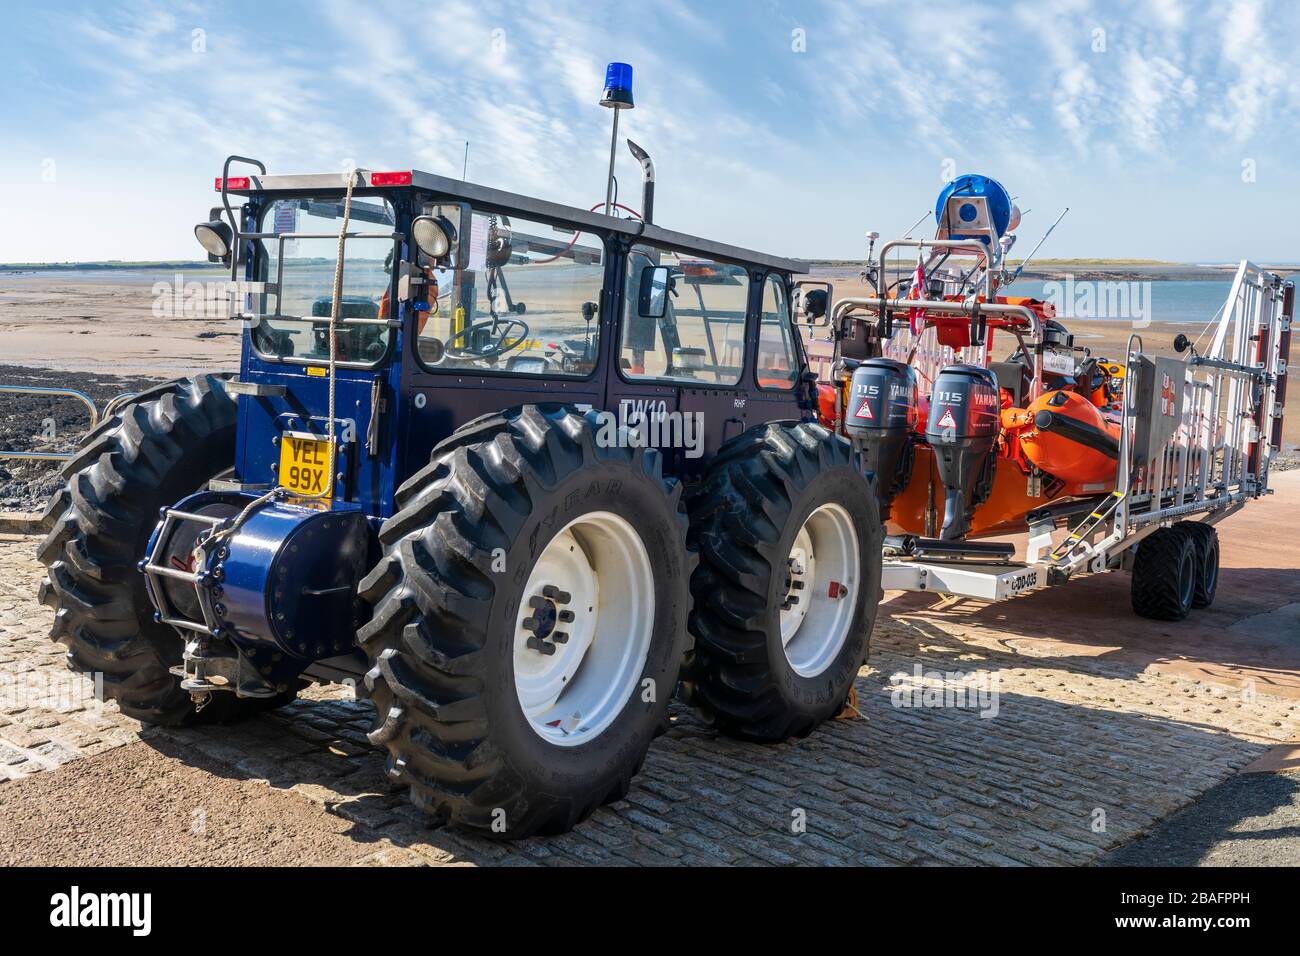 The tractor unit and trailer holding the Appledore fast response RIB Lifeboat. Stock Photo